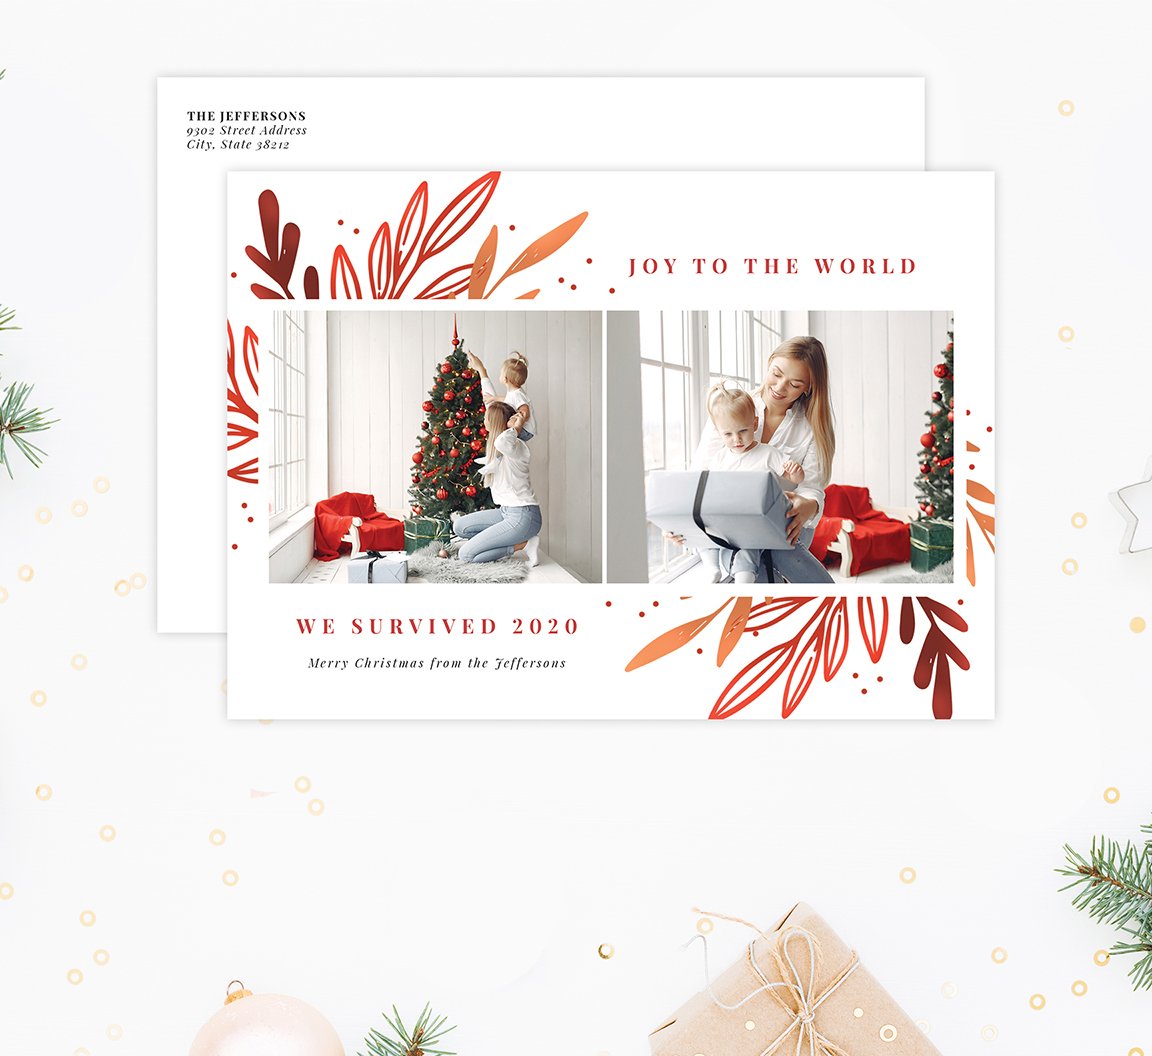 Drawn Orange Holiday Card Mockup; Holiday card with envelope and return address printed on it. 